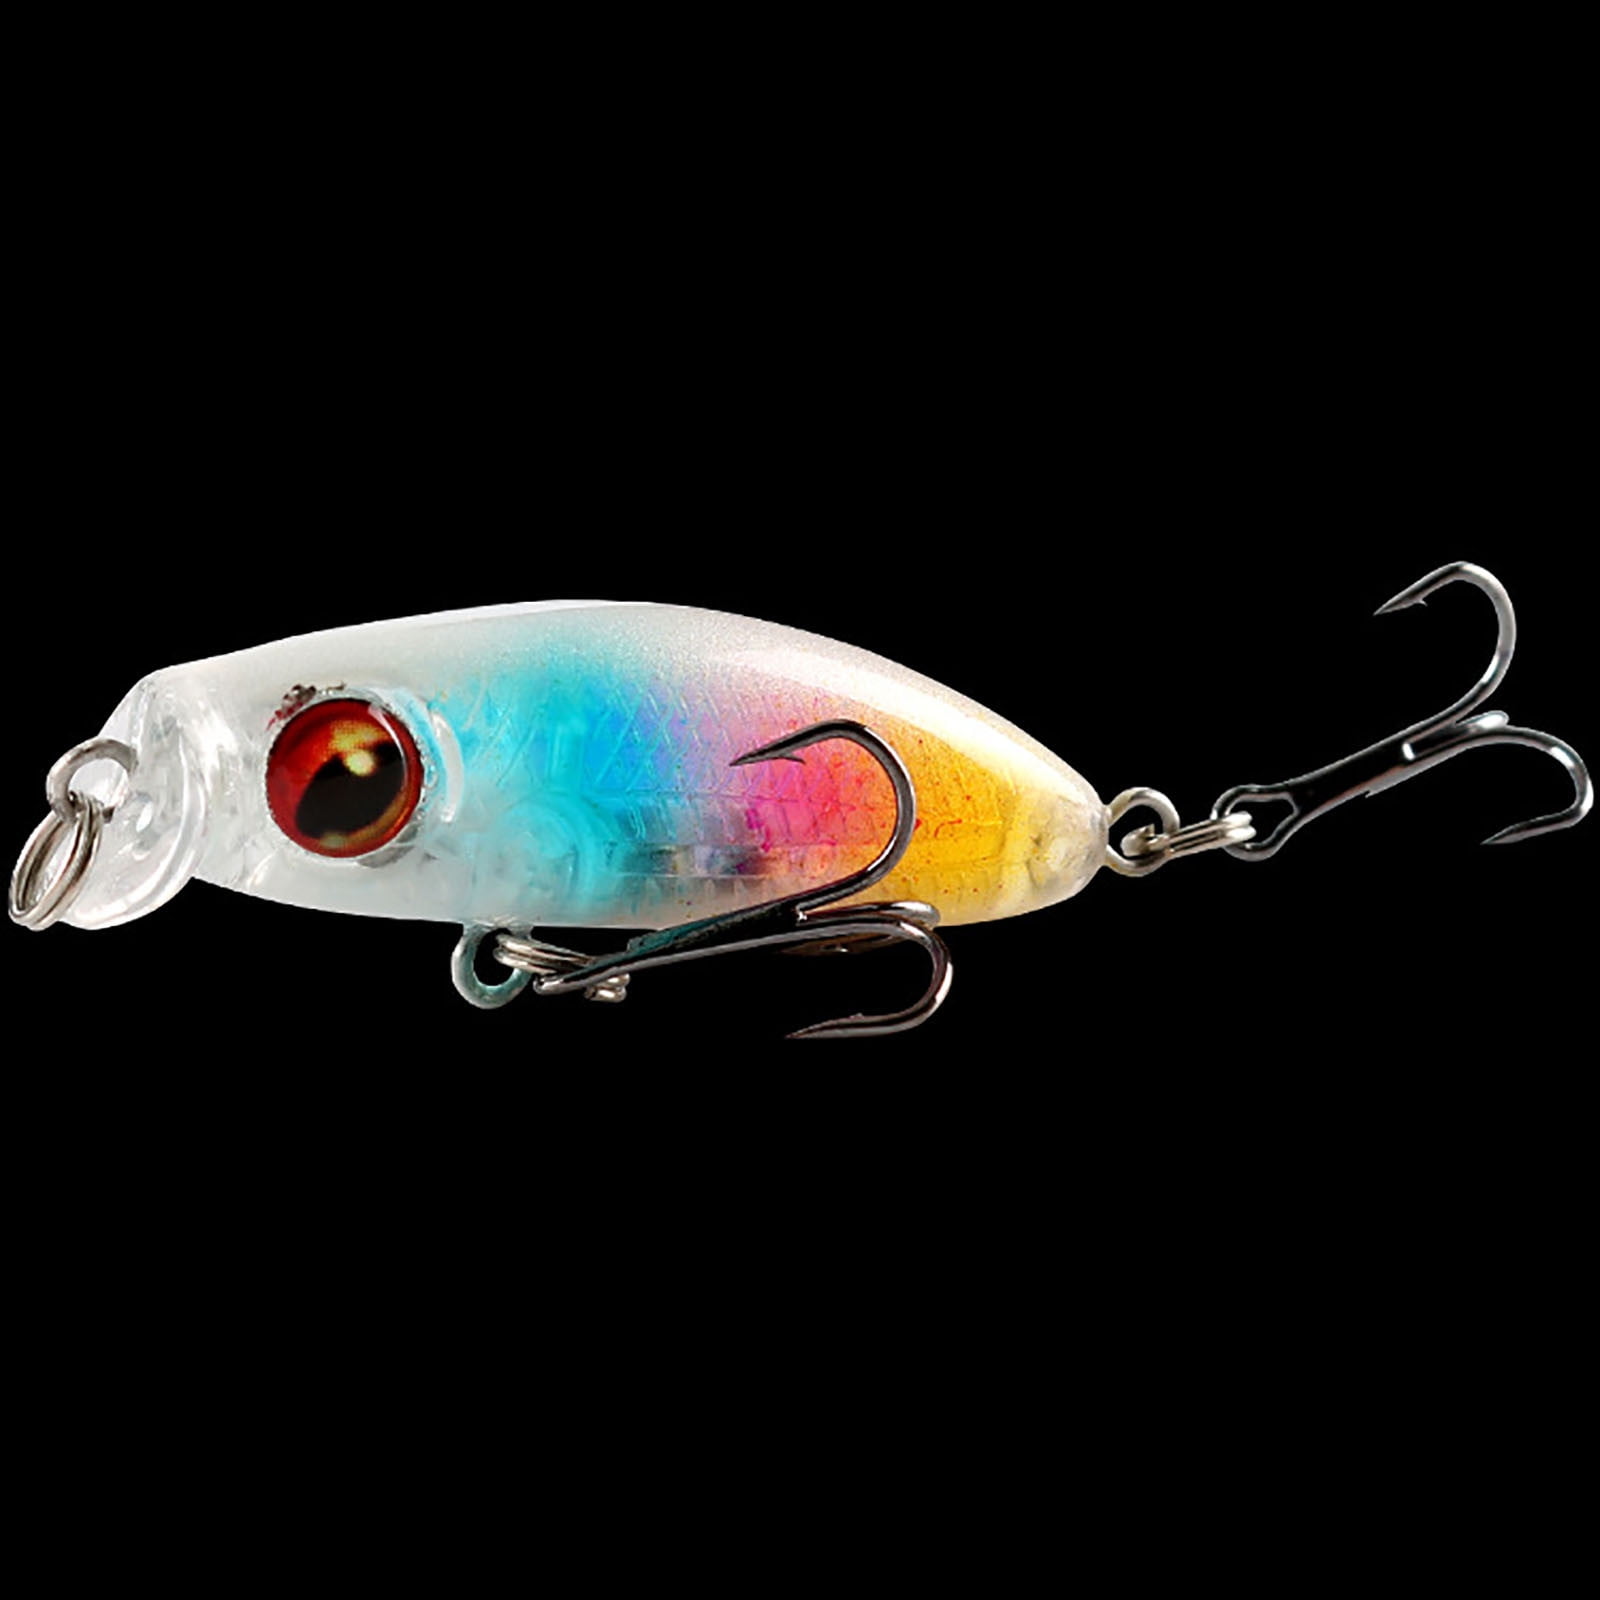 SDJMa 1.9 Fishing Lures Crankbaits, Pre-Rigged Swimbaits with